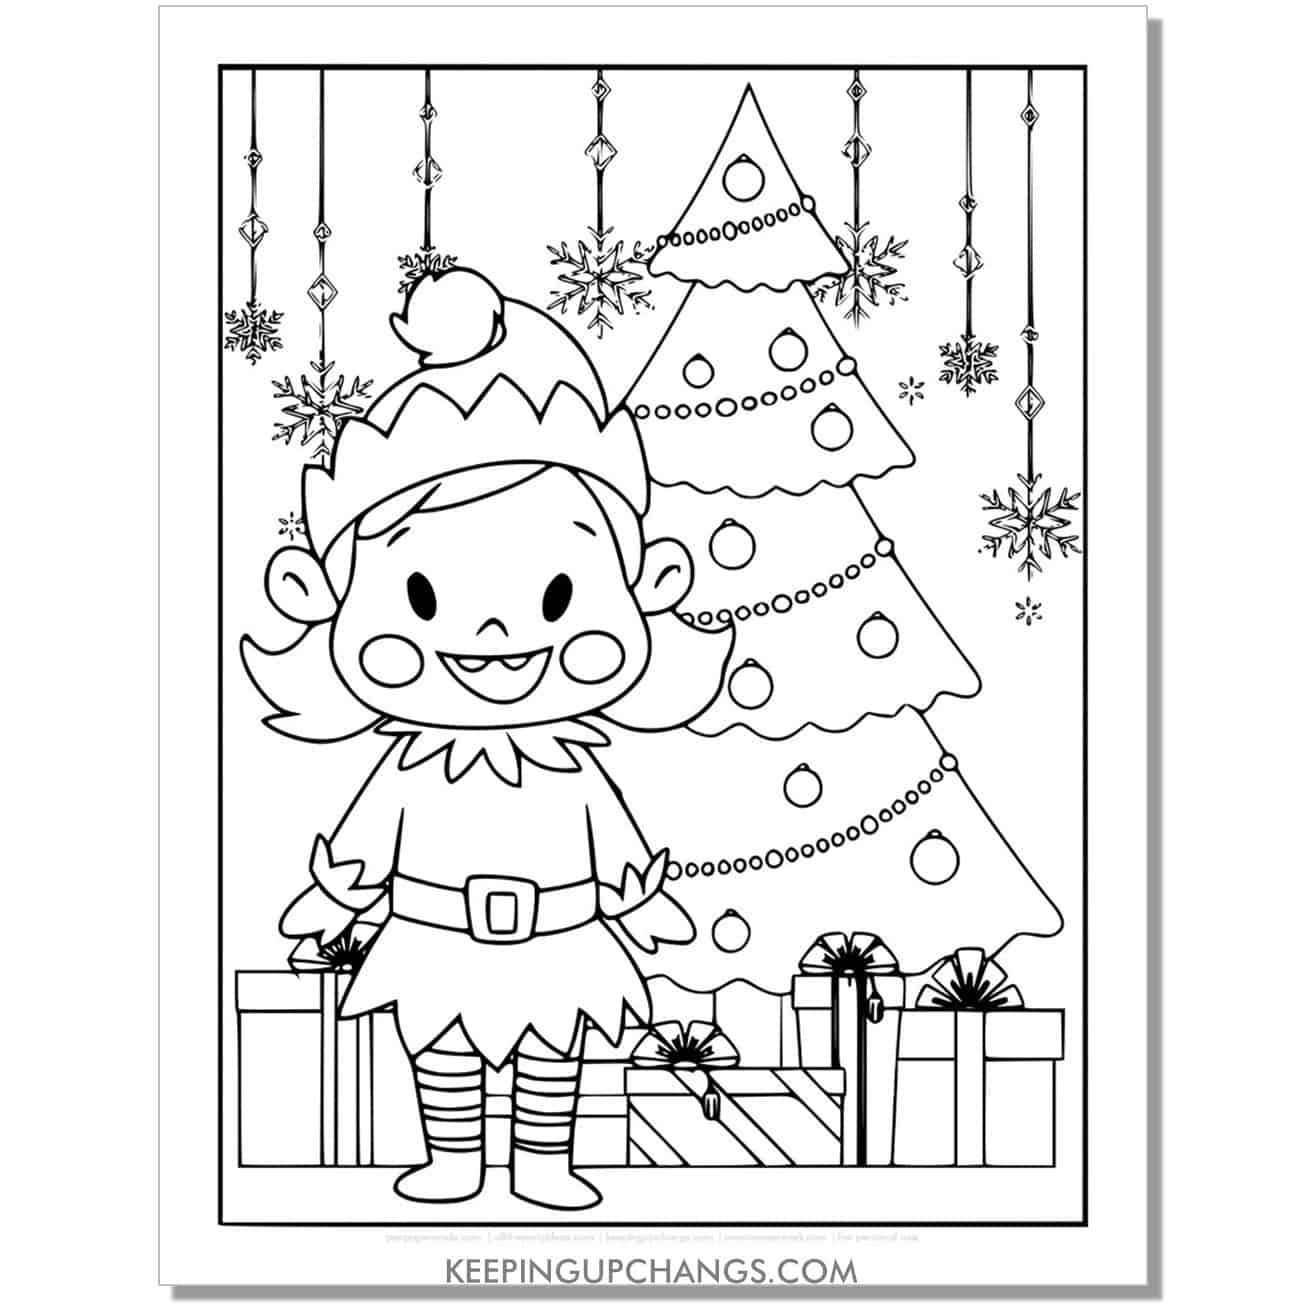 free girl elf in front of tree with hanging ornaments full size coloring page.